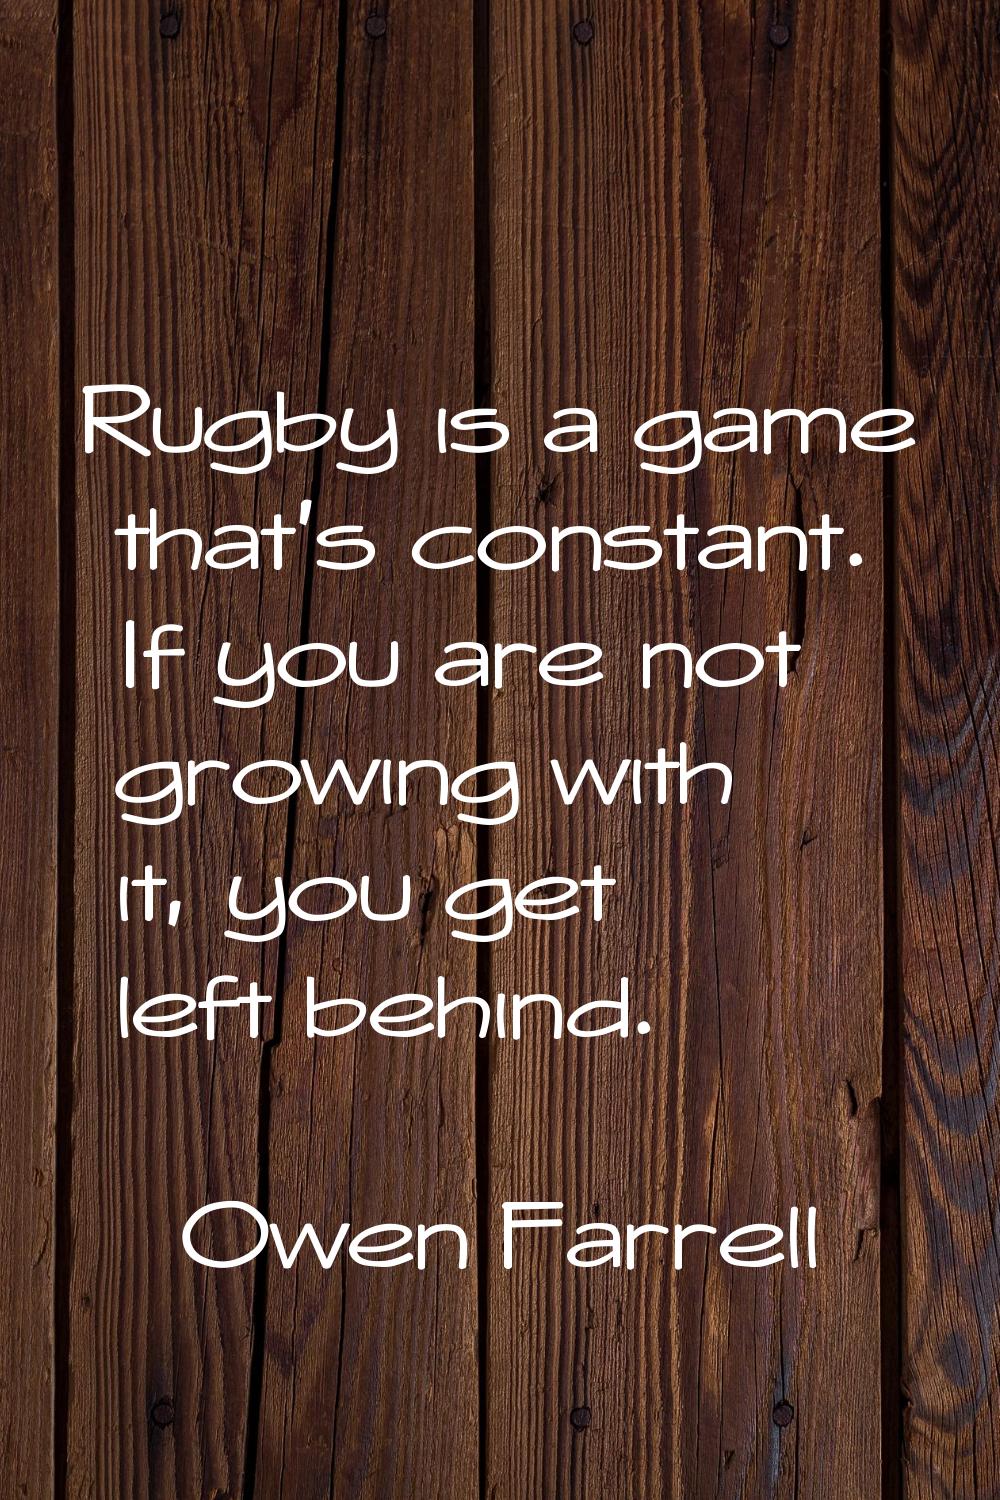 Rugby is a game that's constant. If you are not growing with it, you get left behind.